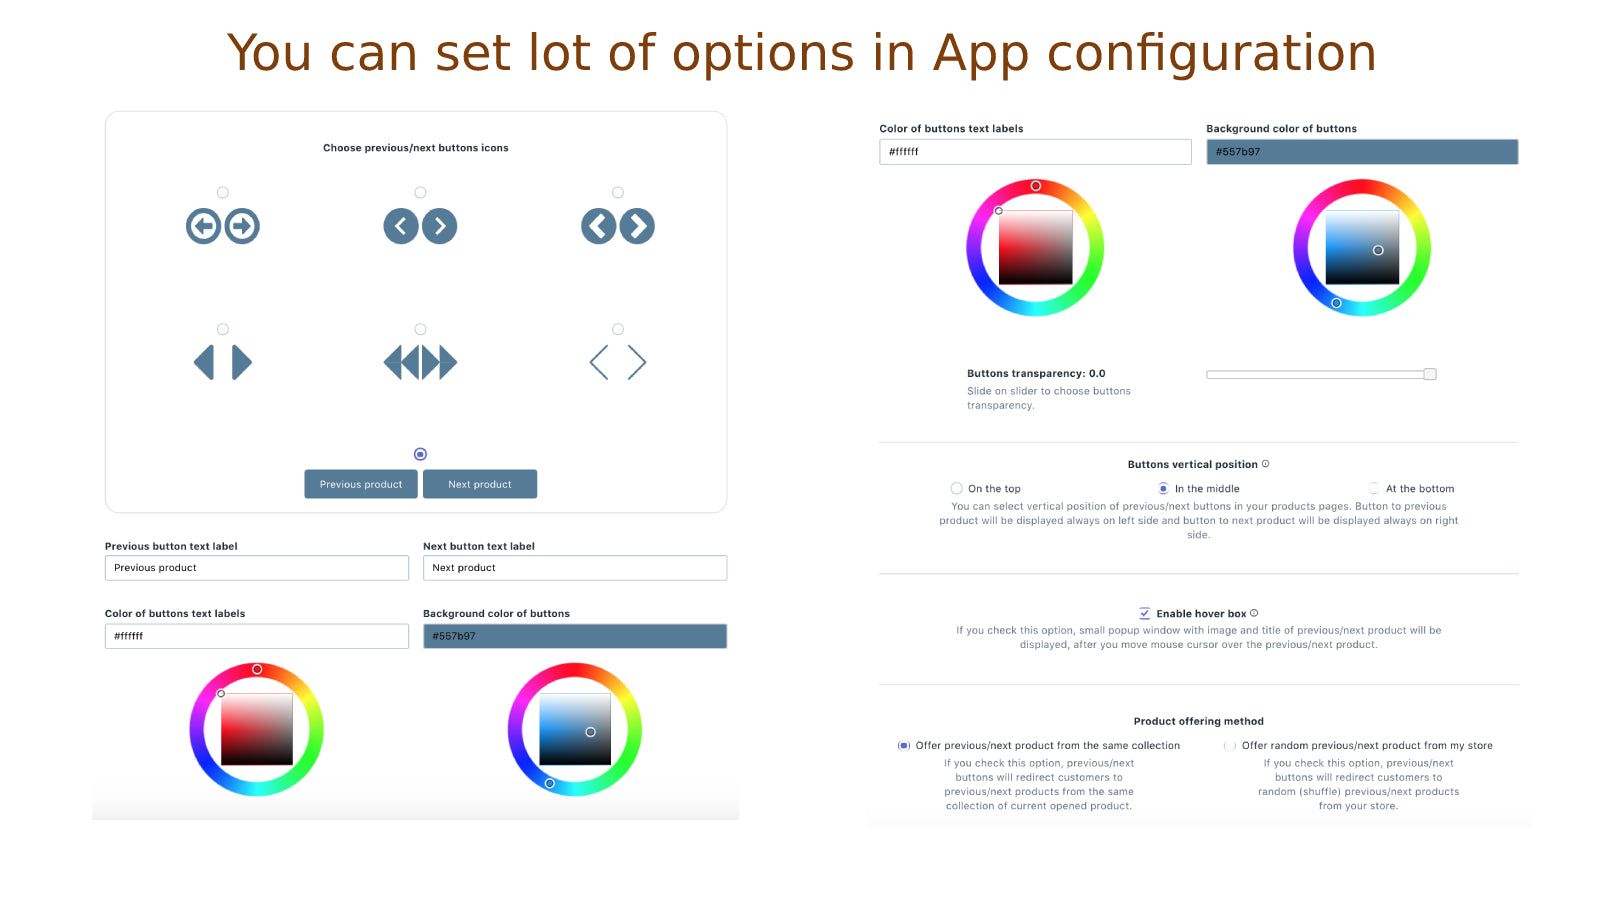 You can set lot of options in app configuration